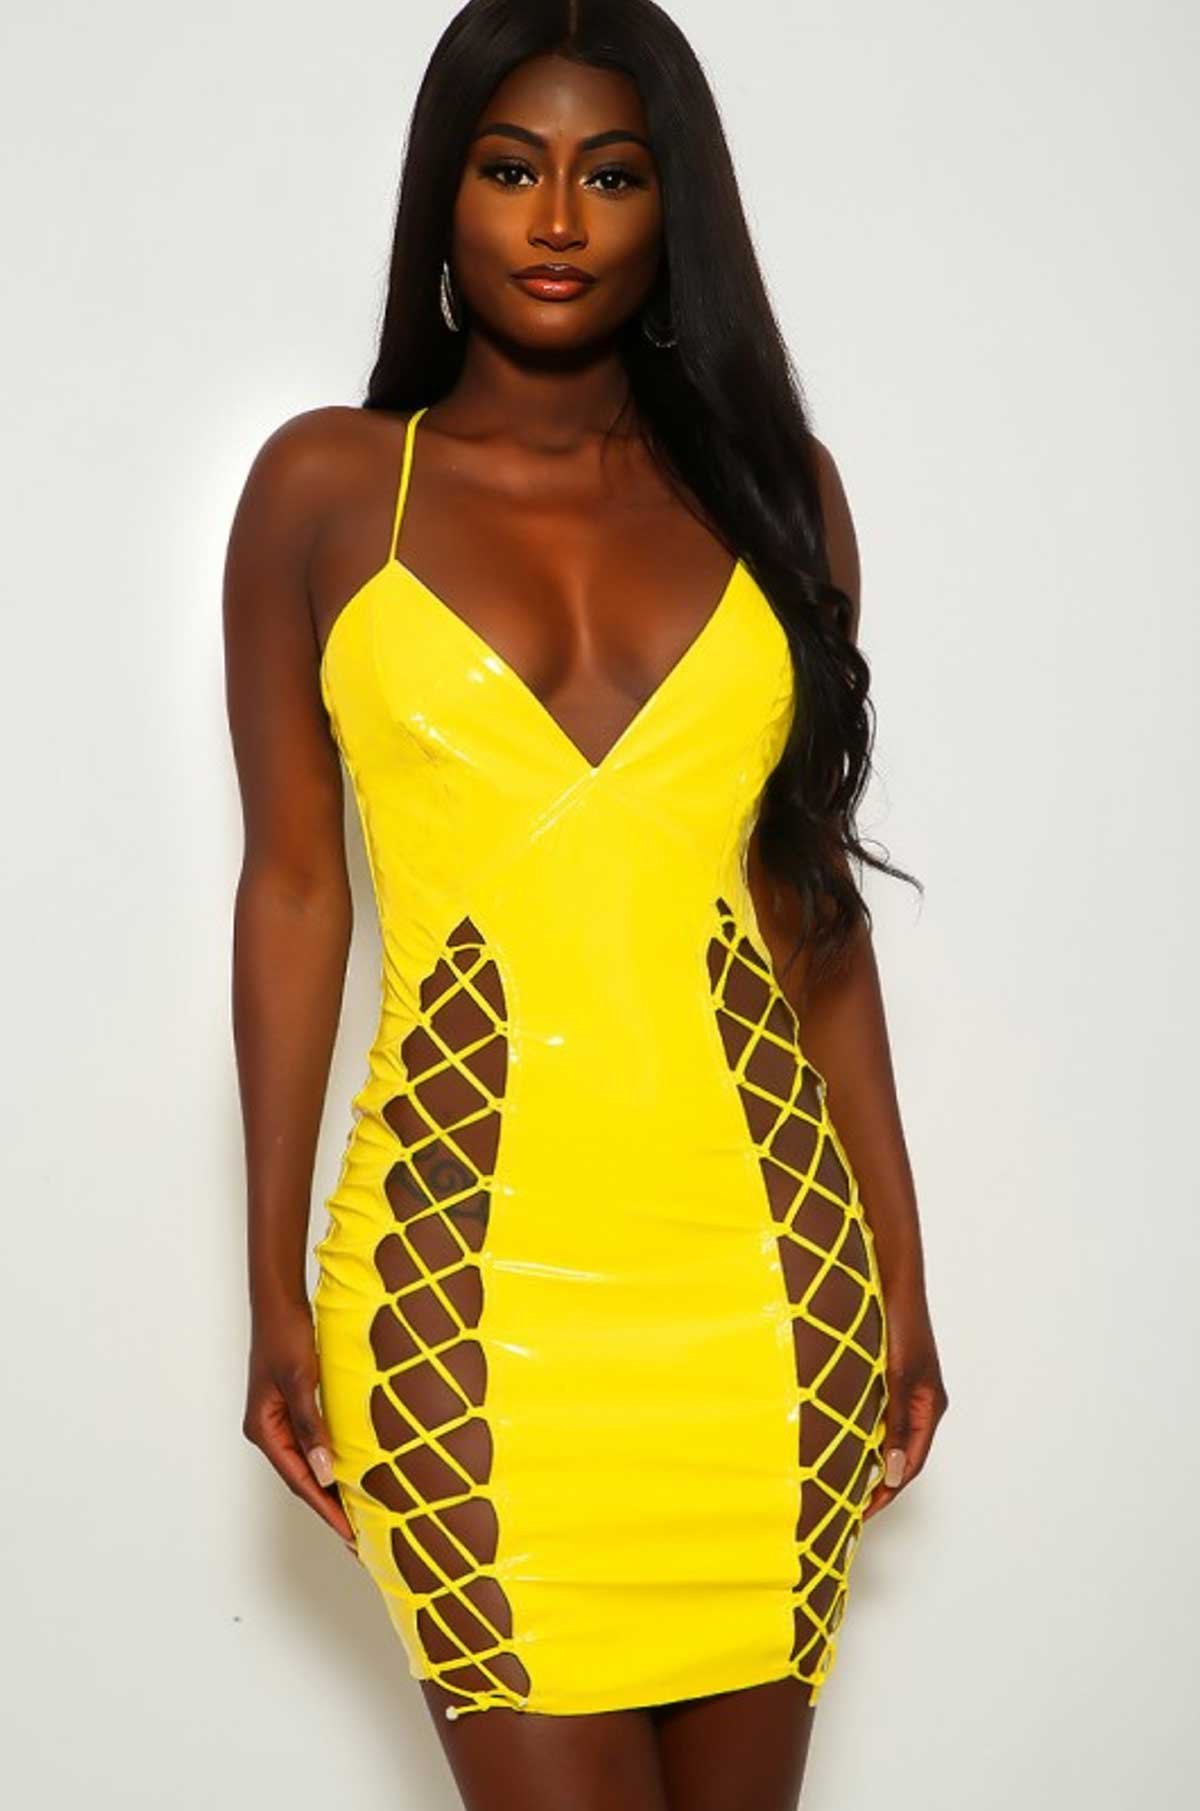 A yellow body-con dress would look so pretty: